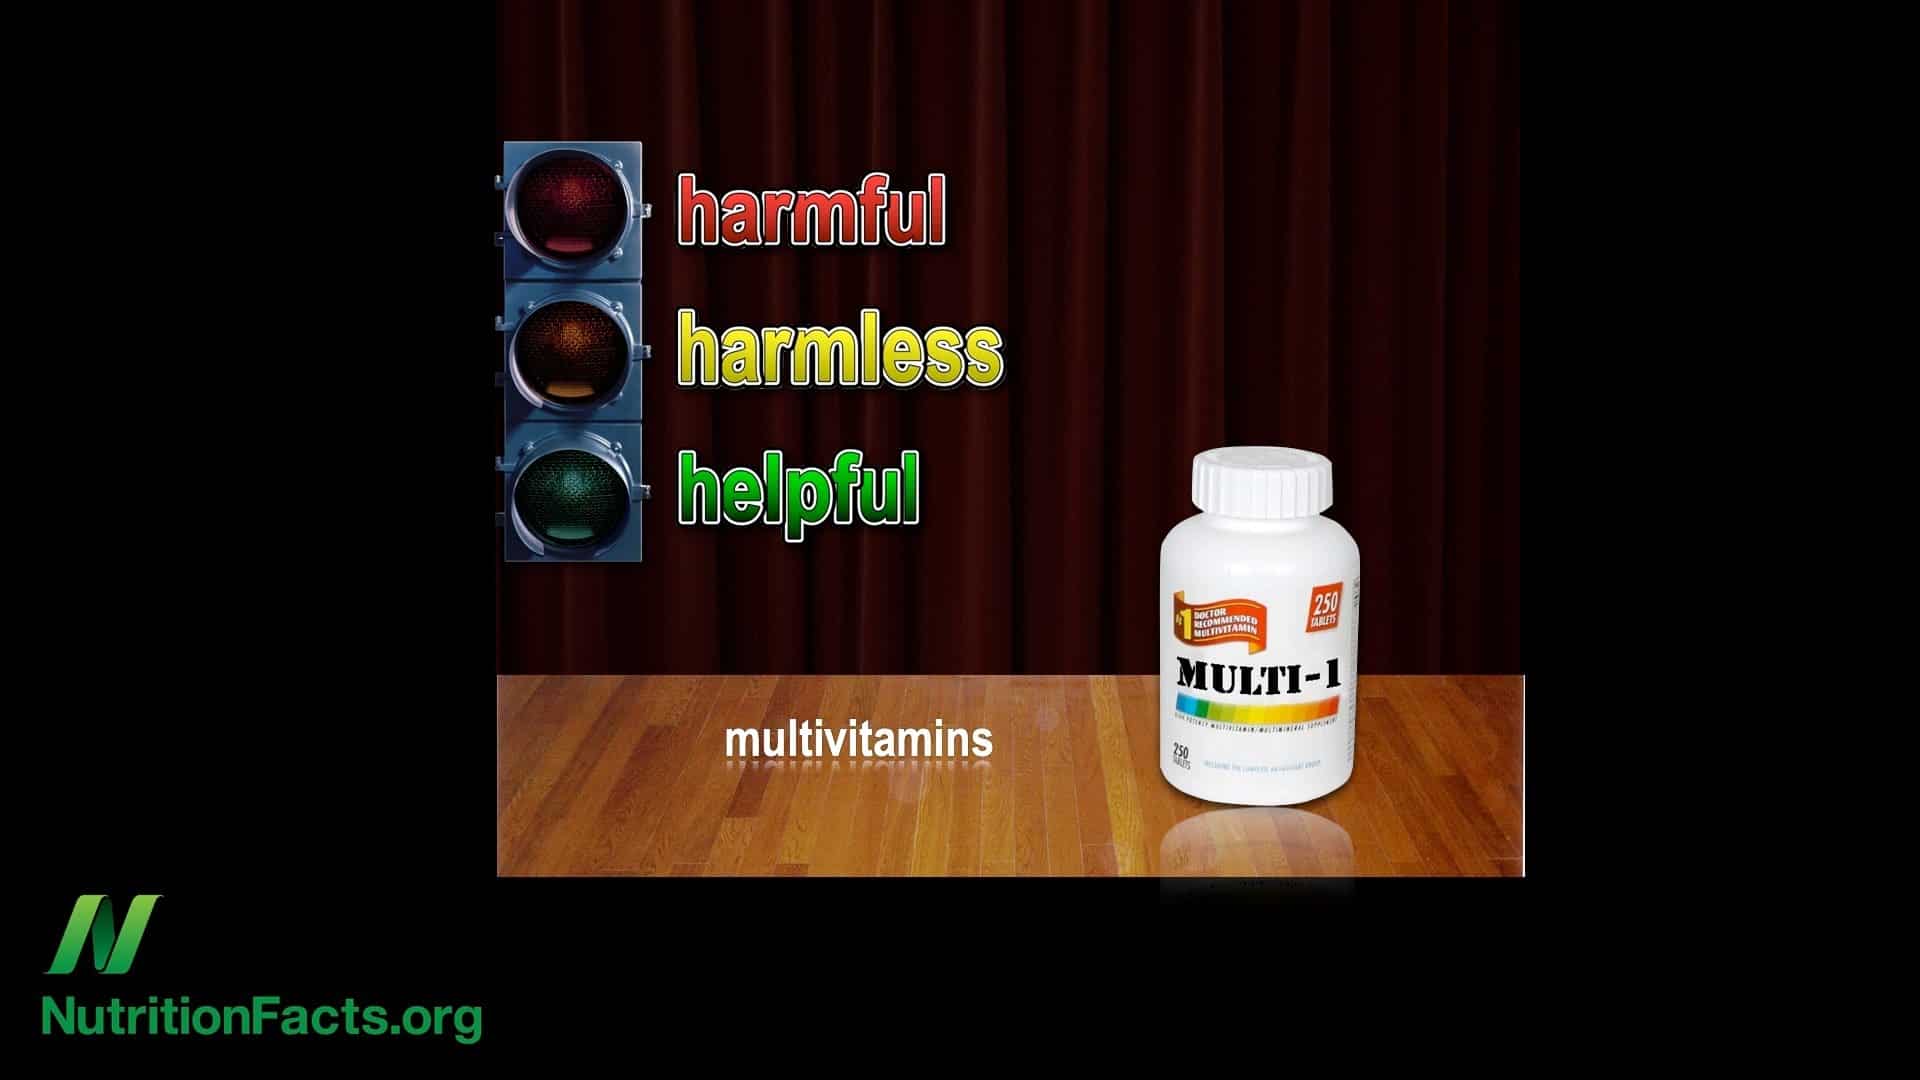 Are Multivitamins Good For You?